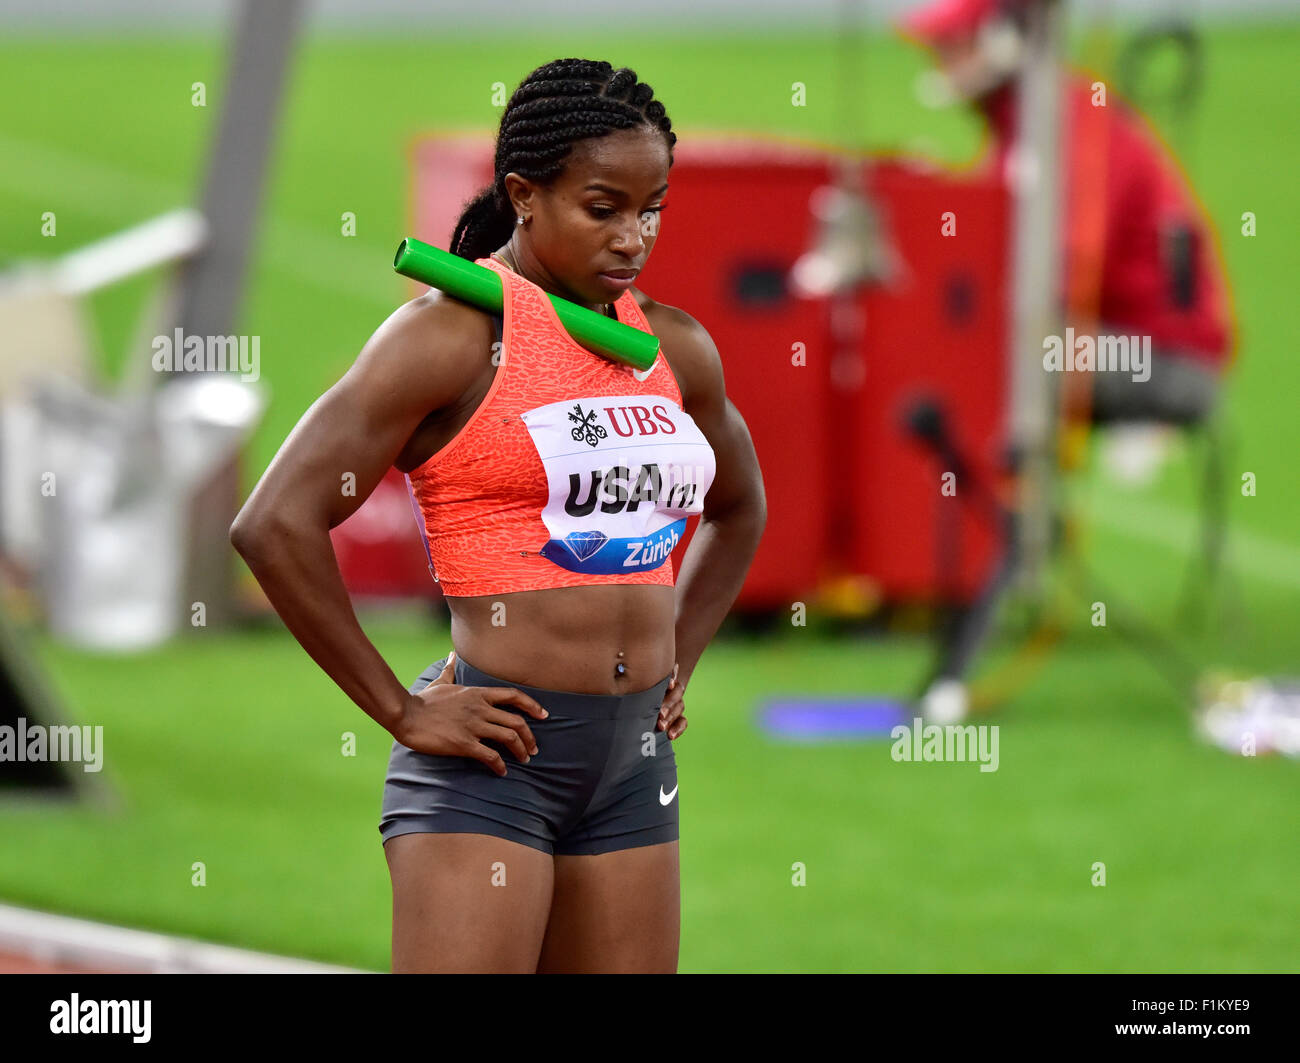 Zurich, Switzerland, 03rd Sep, 2015. Barbara Pierre, first runner of USA's 4x100m relay team and her baton before the start. Jamaica's relay team beat team USA at the 2015 IAAF Diamond League athletics meeting in Zurich. Credit:  Erik Tham/Alamy Live News Stock Photo